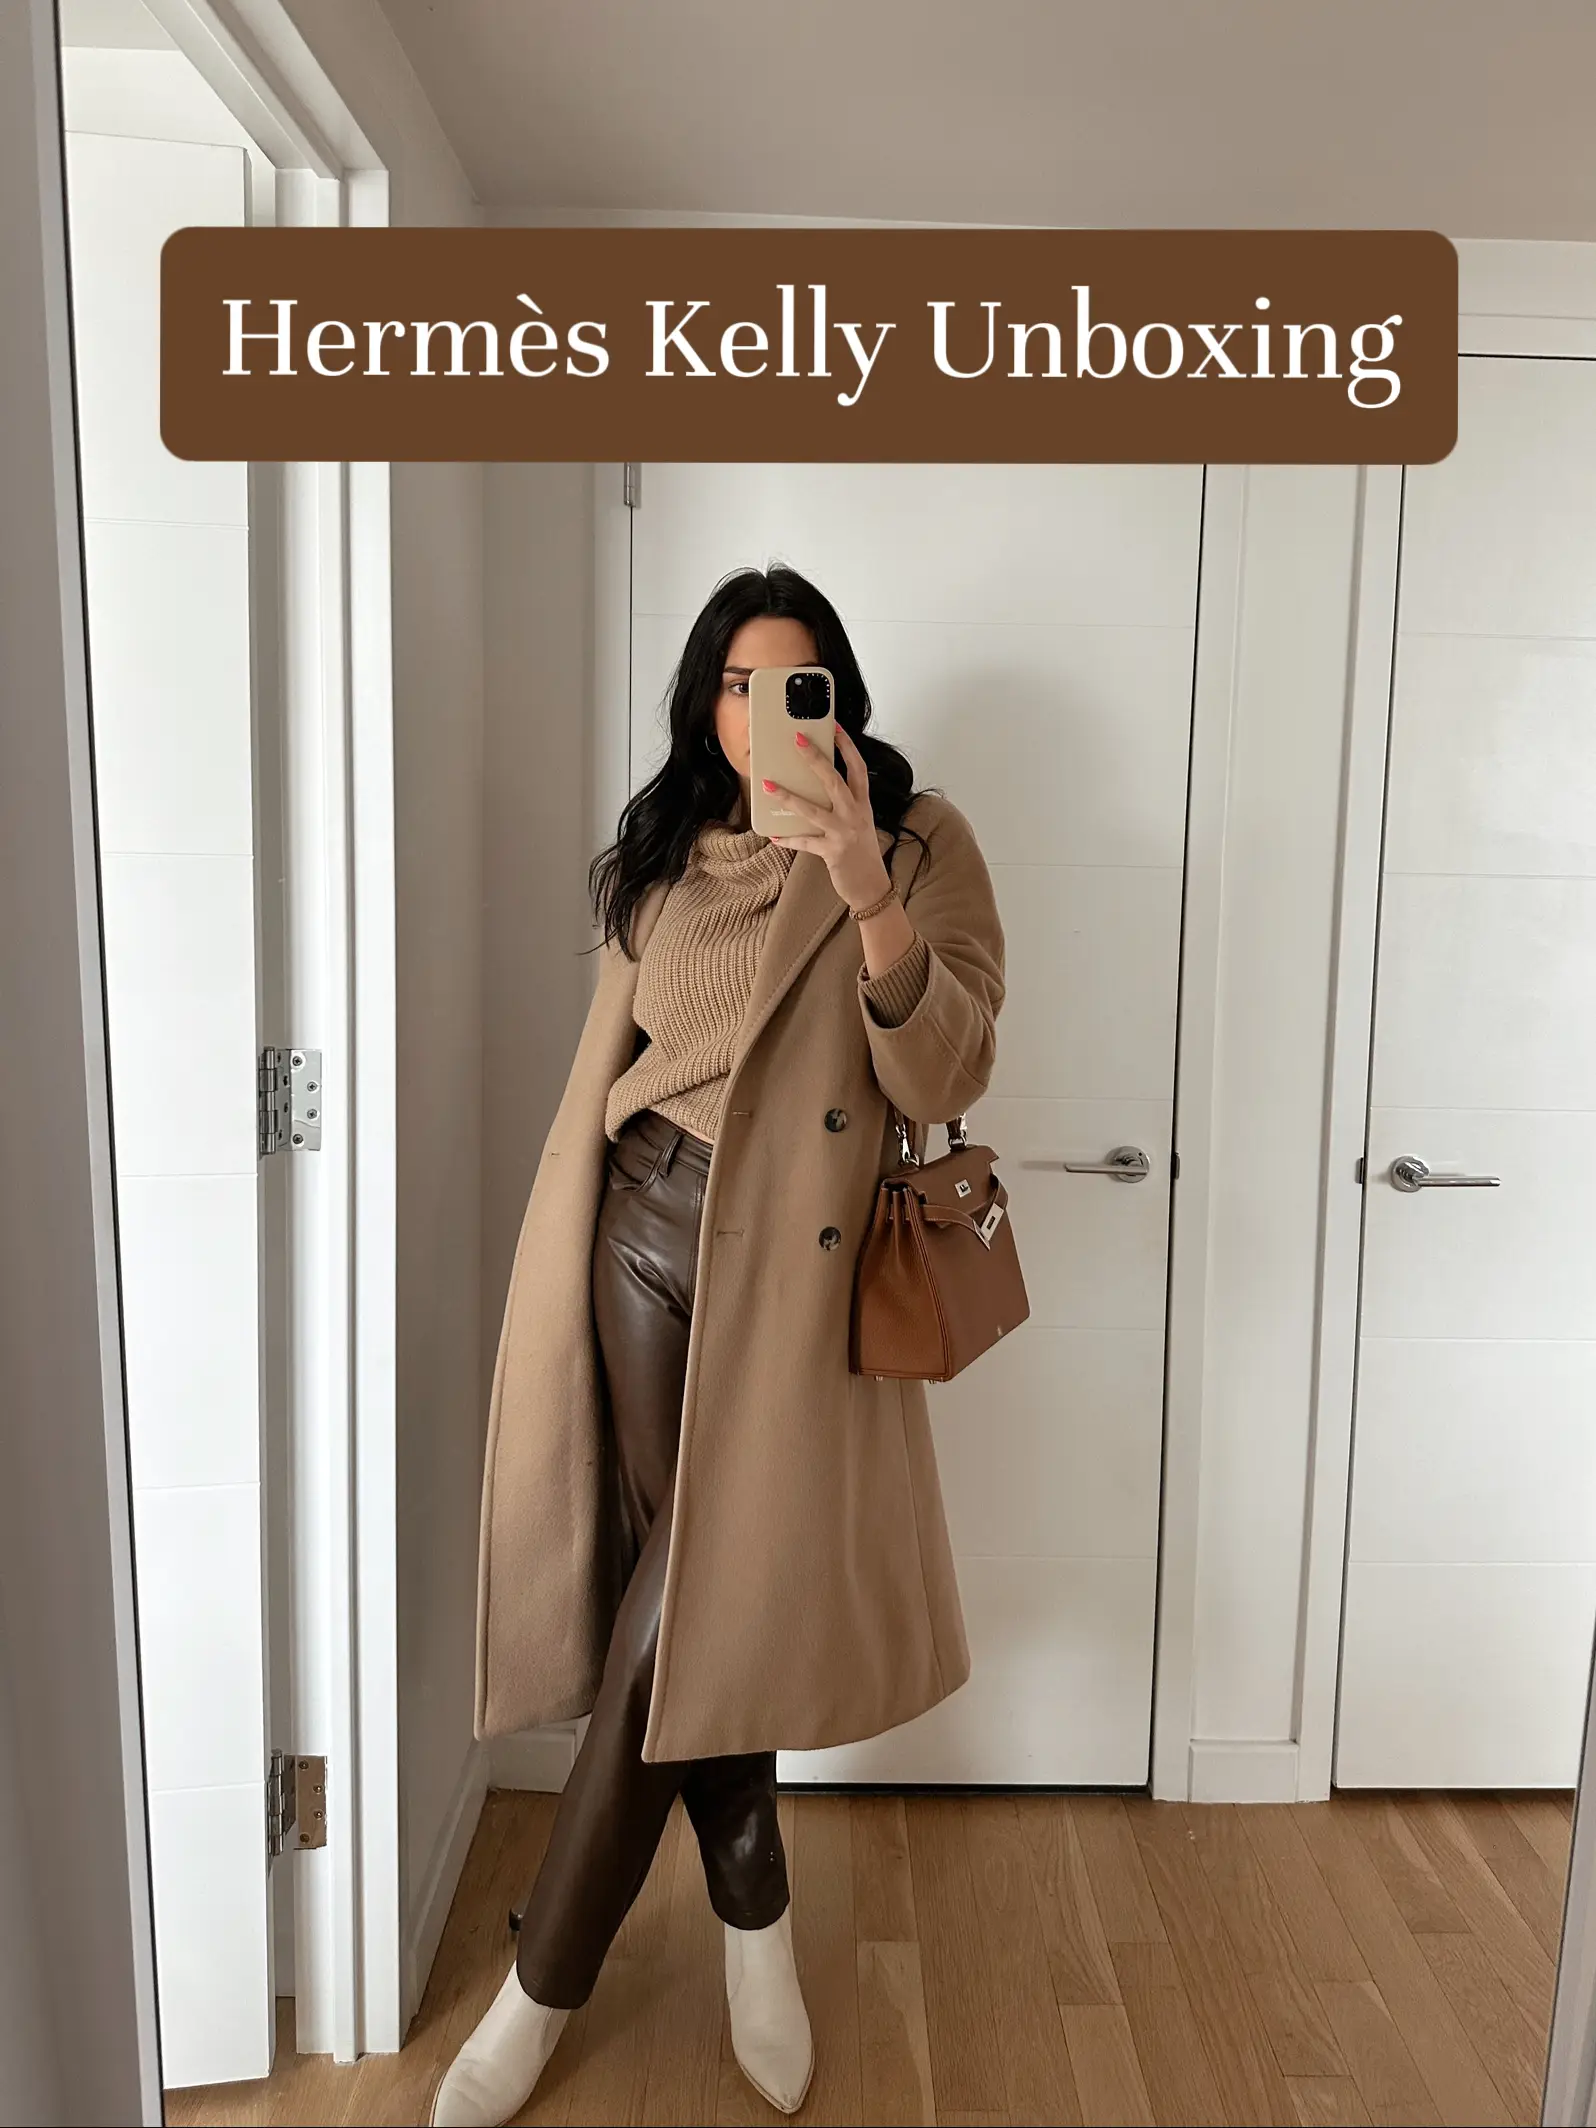 👜 Hermès Kelly Unboxing, Video published by Brooke Miccio